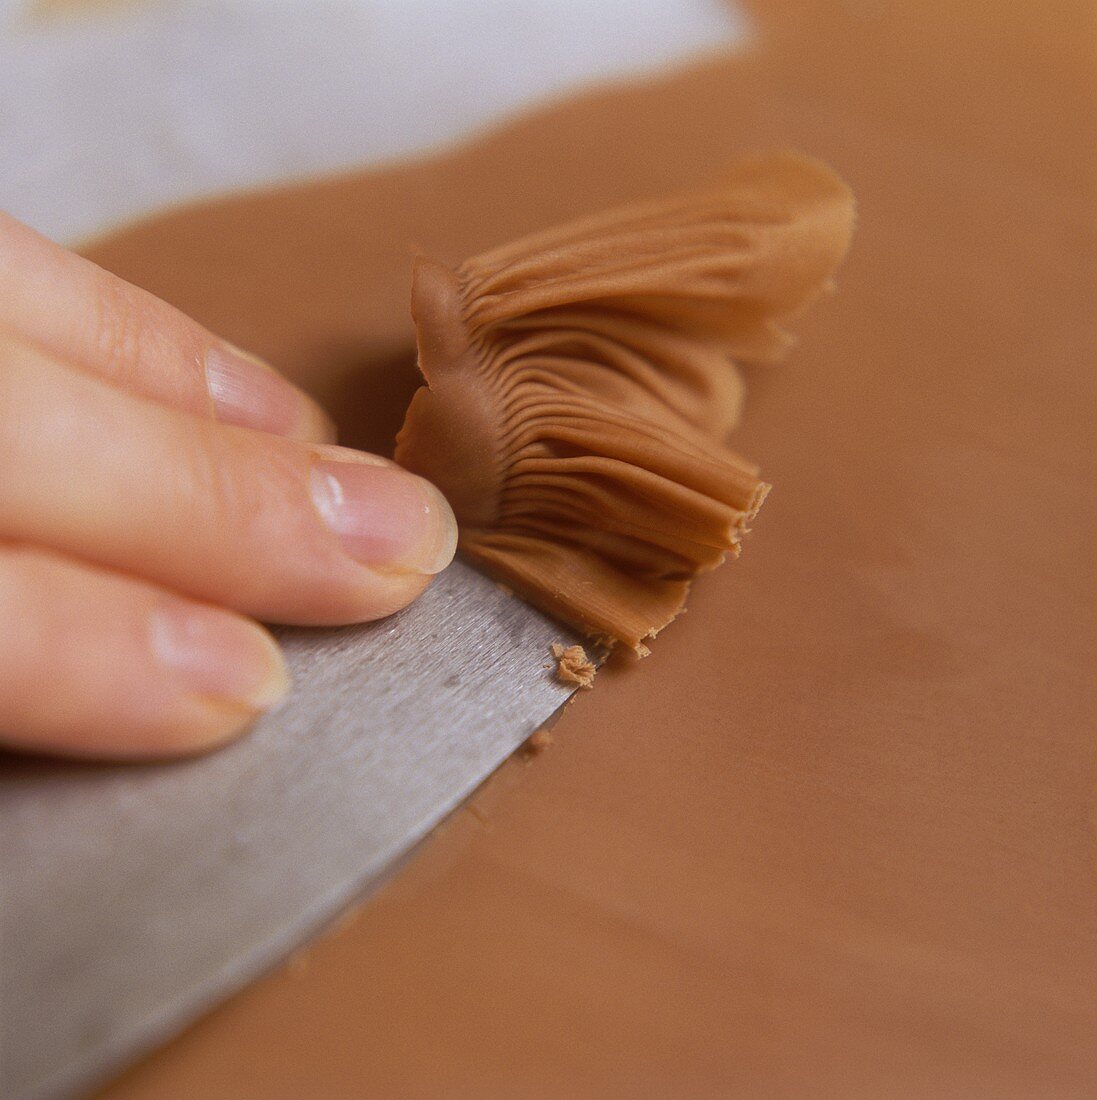 Scraping chocolate from a baking tray (making chocolate fans)